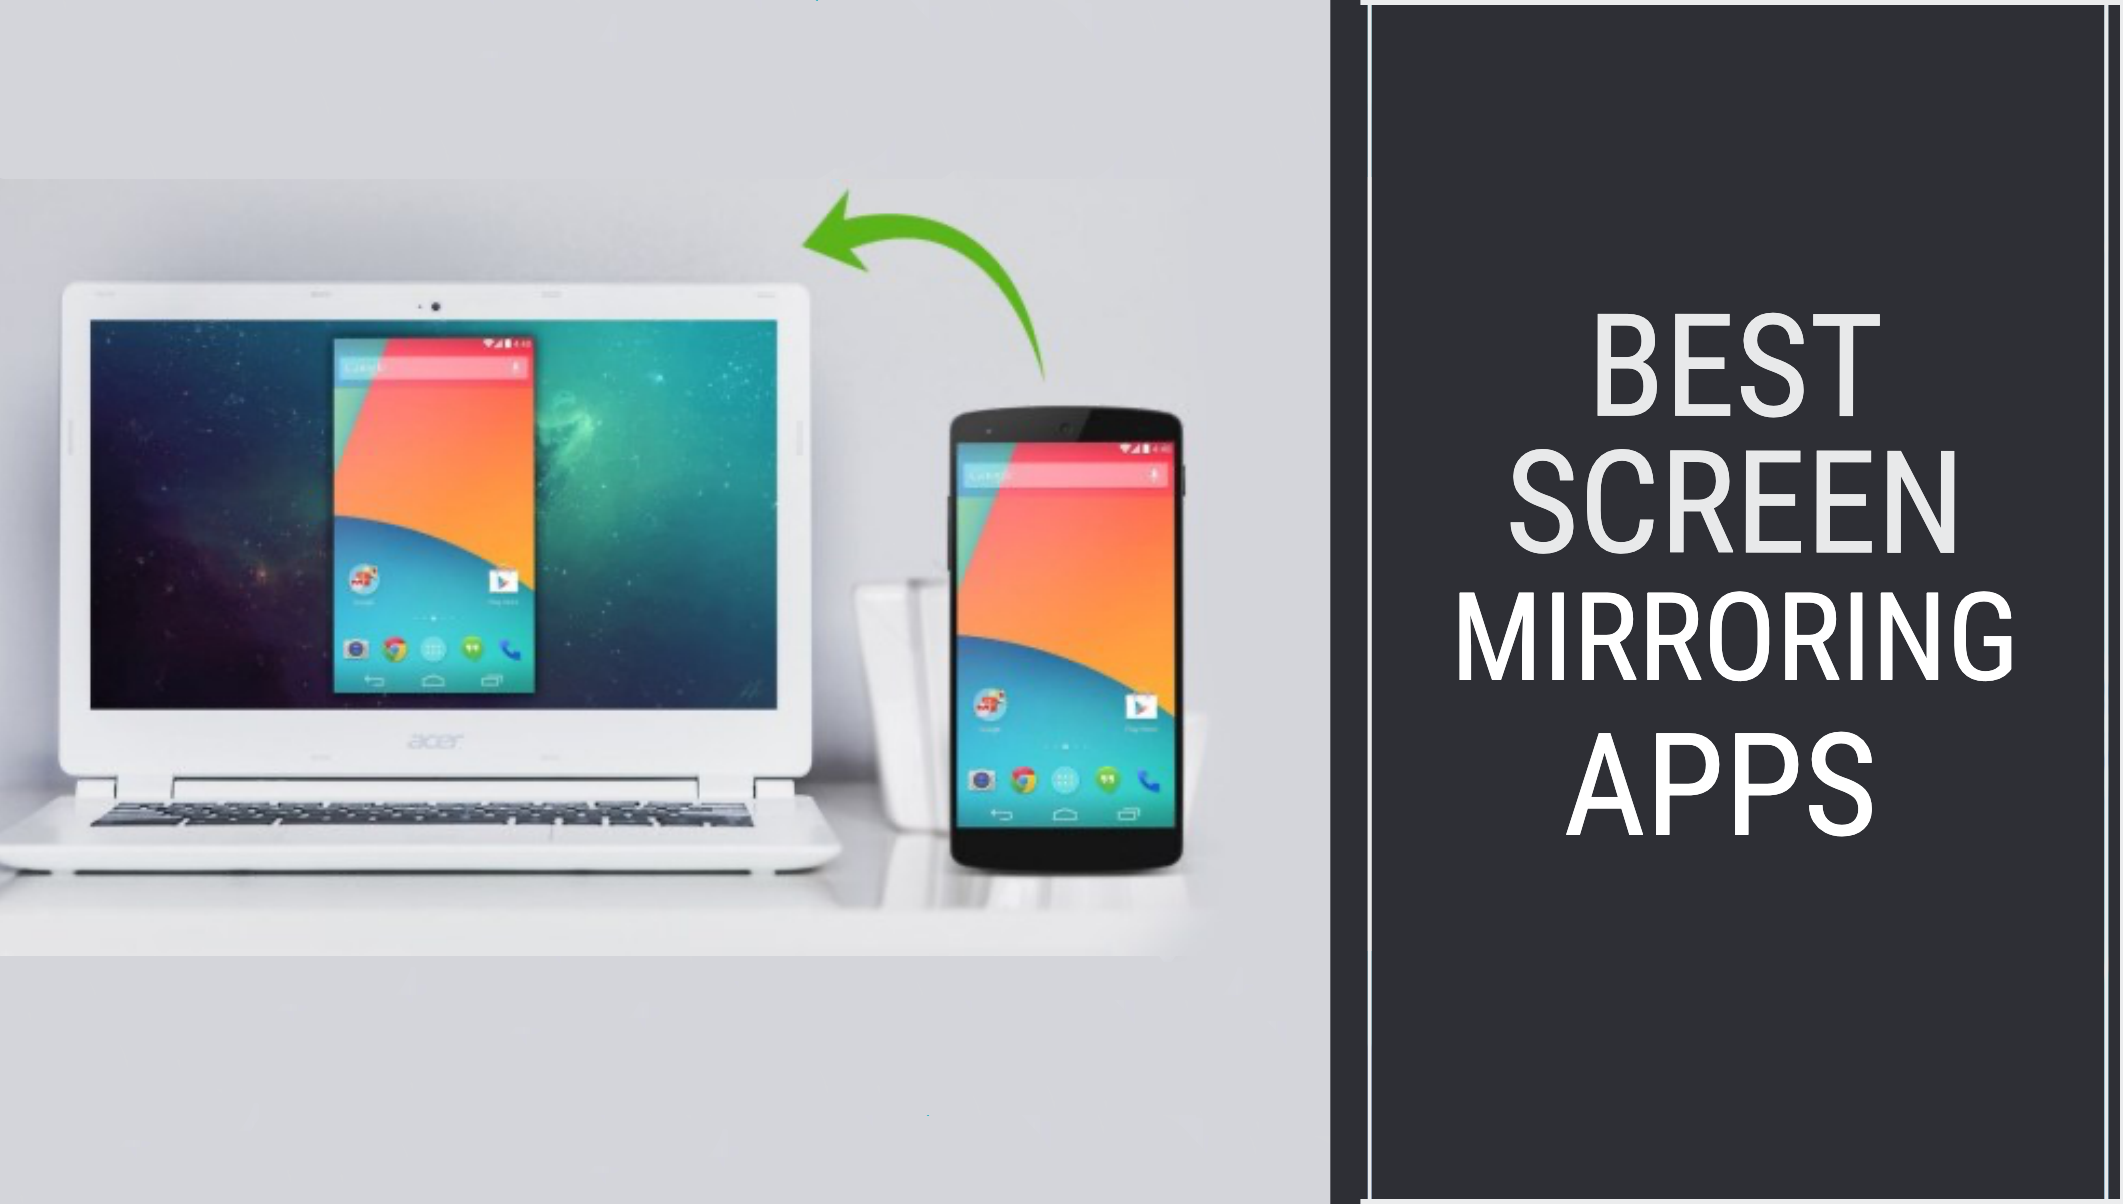 Screen Mirroring Apps For Android Devices, Best Screen Mirroring Apps For Pc